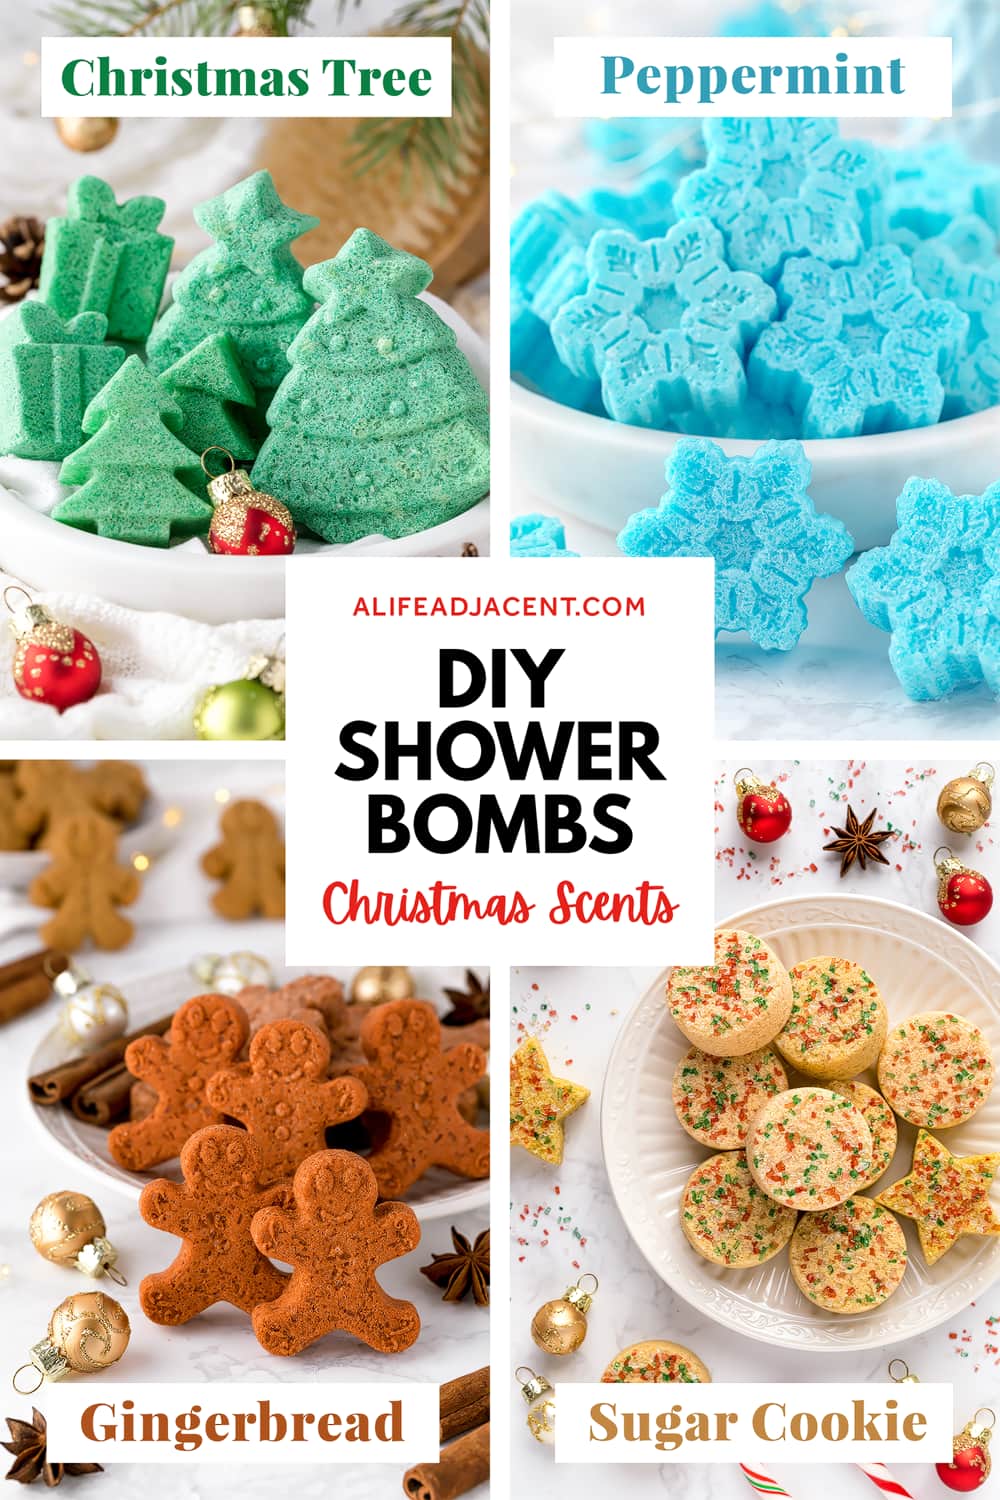 DIY shower bombs – Christmas tree, peppermint, gingerbread and sugar cookie